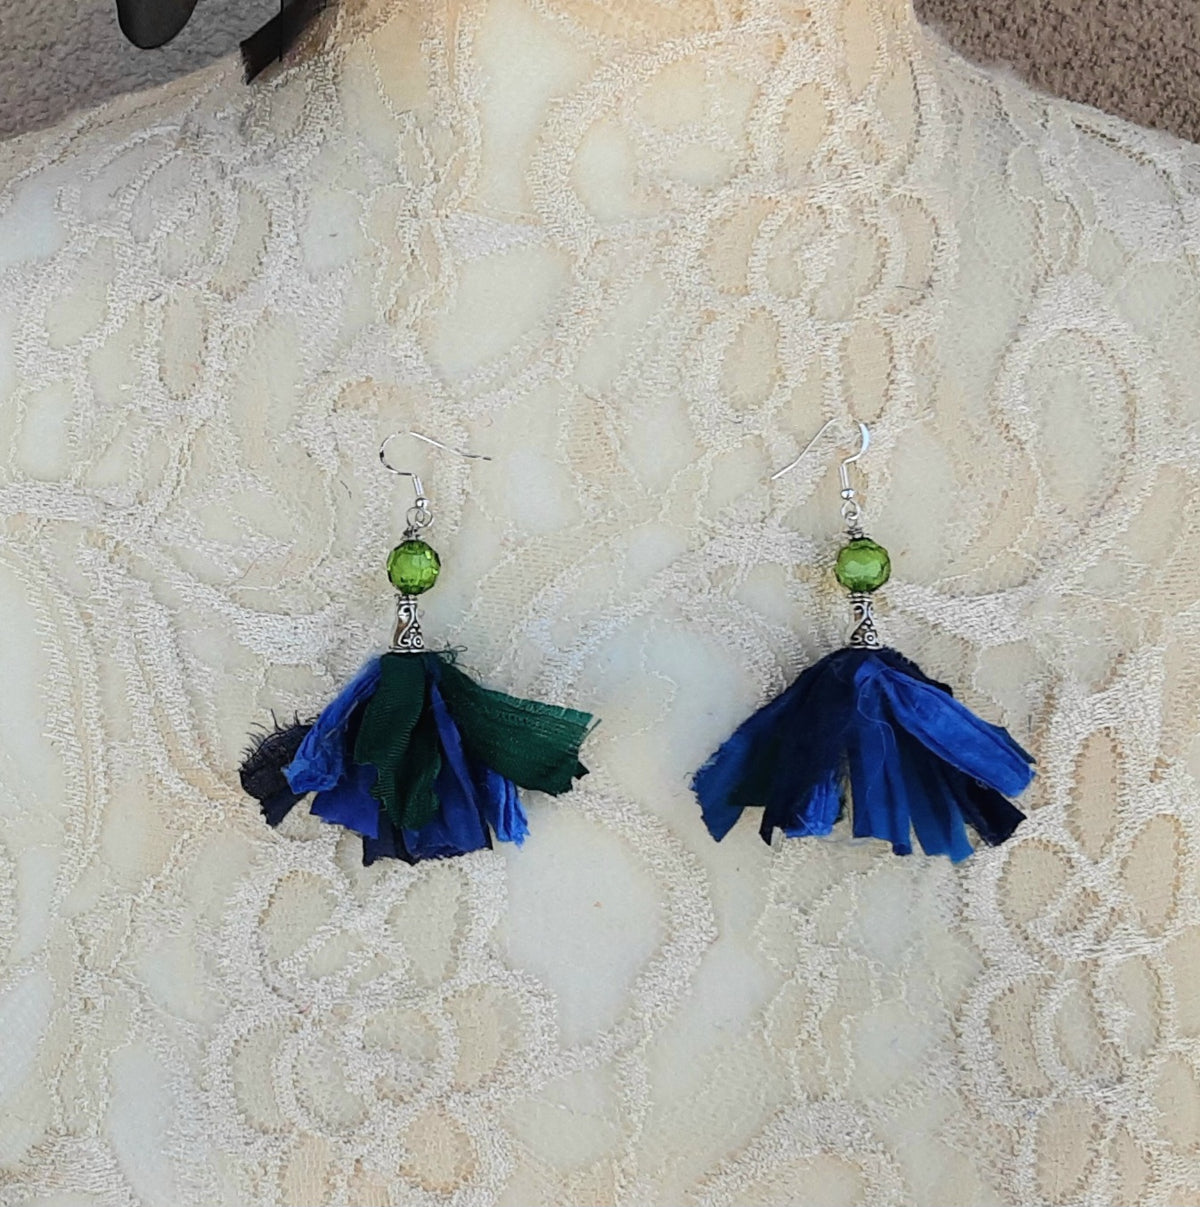 Fuzzy Sari Silk Ribbon Flower Brooch with Earrings - Large Blue & Green Fabric Floral Pin - Vintage Textile Art Corsage